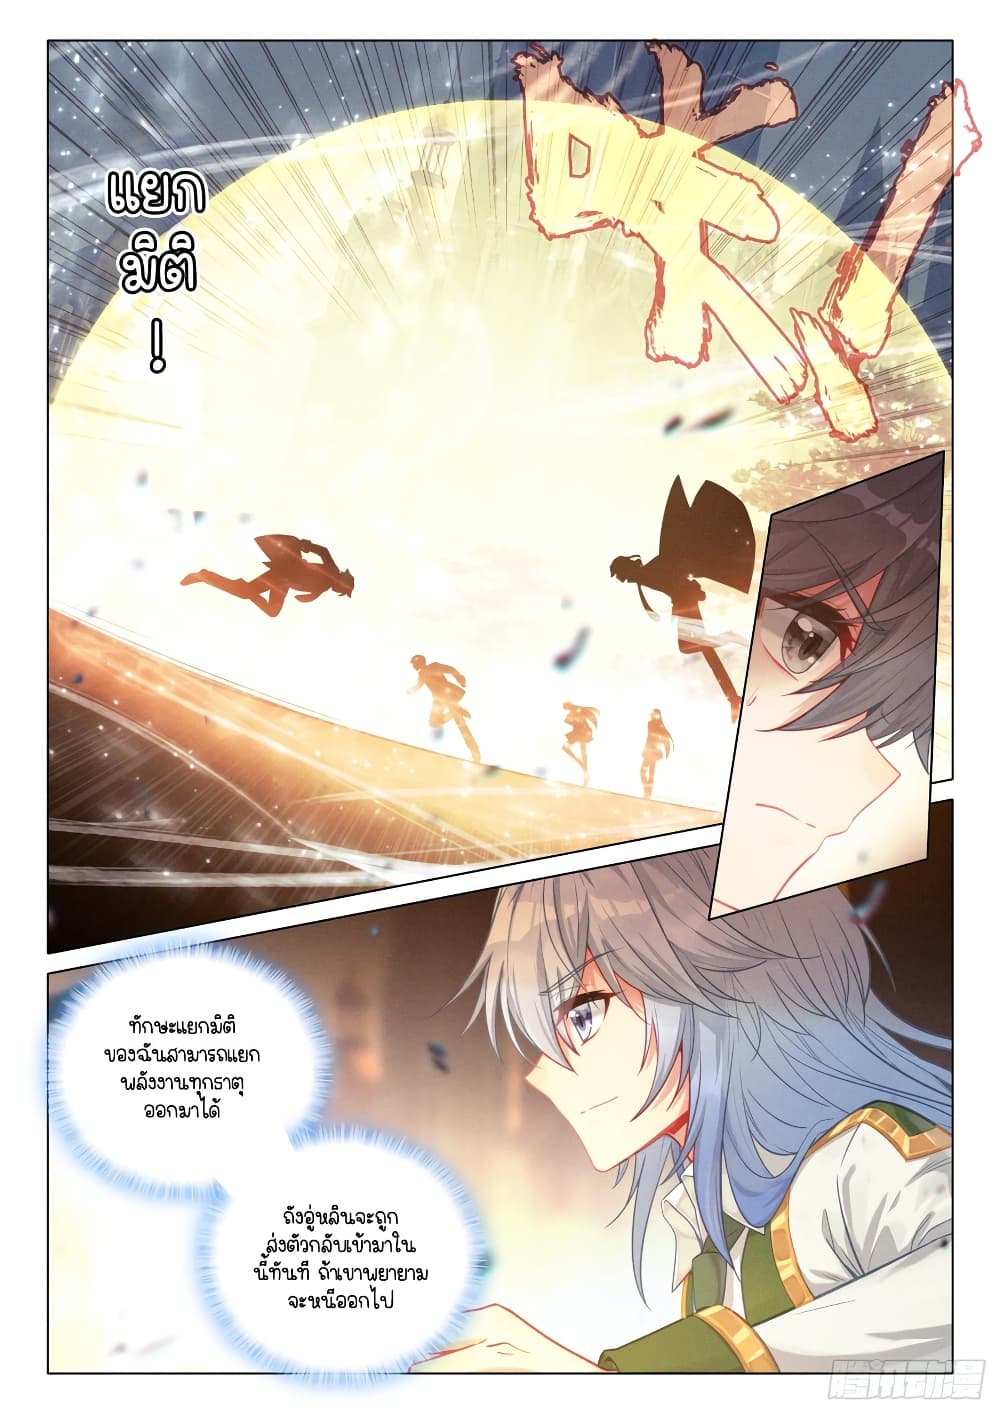 Douluo Dalu 3: The Legend of the Dragon King 285-ปฐมบทของมังกรทอง